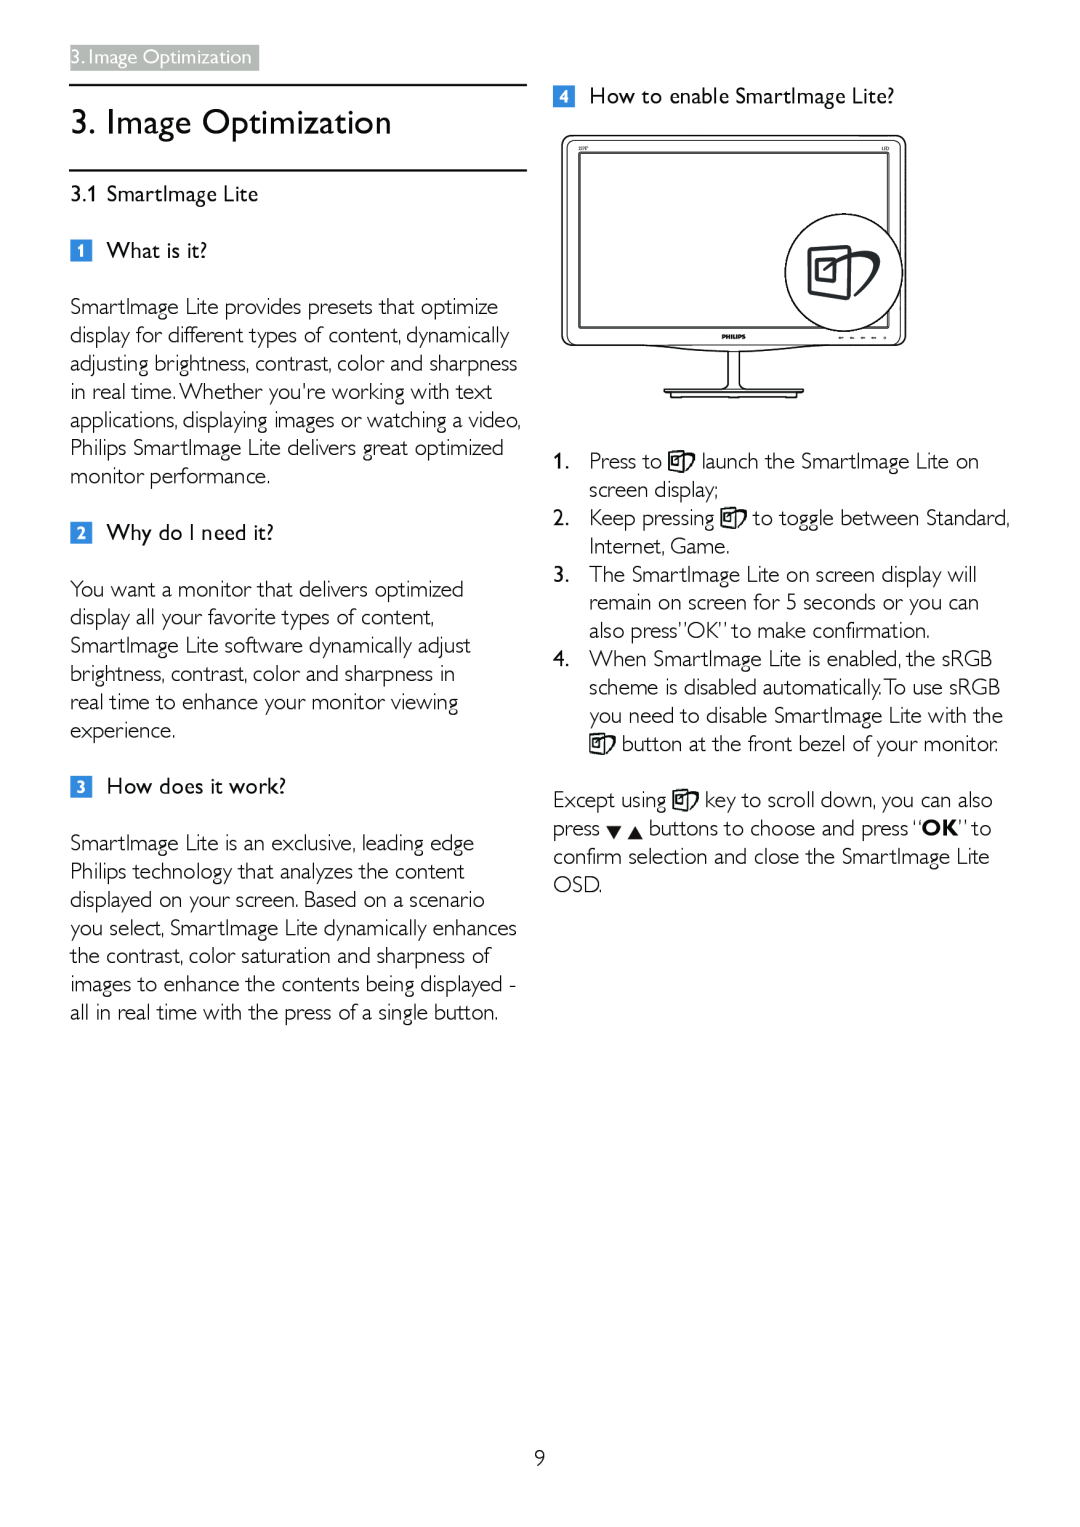 Philips 197E3L user manual Image Optimization, SmartImage Lite What is it?, Why do I need it?, How does it work? 